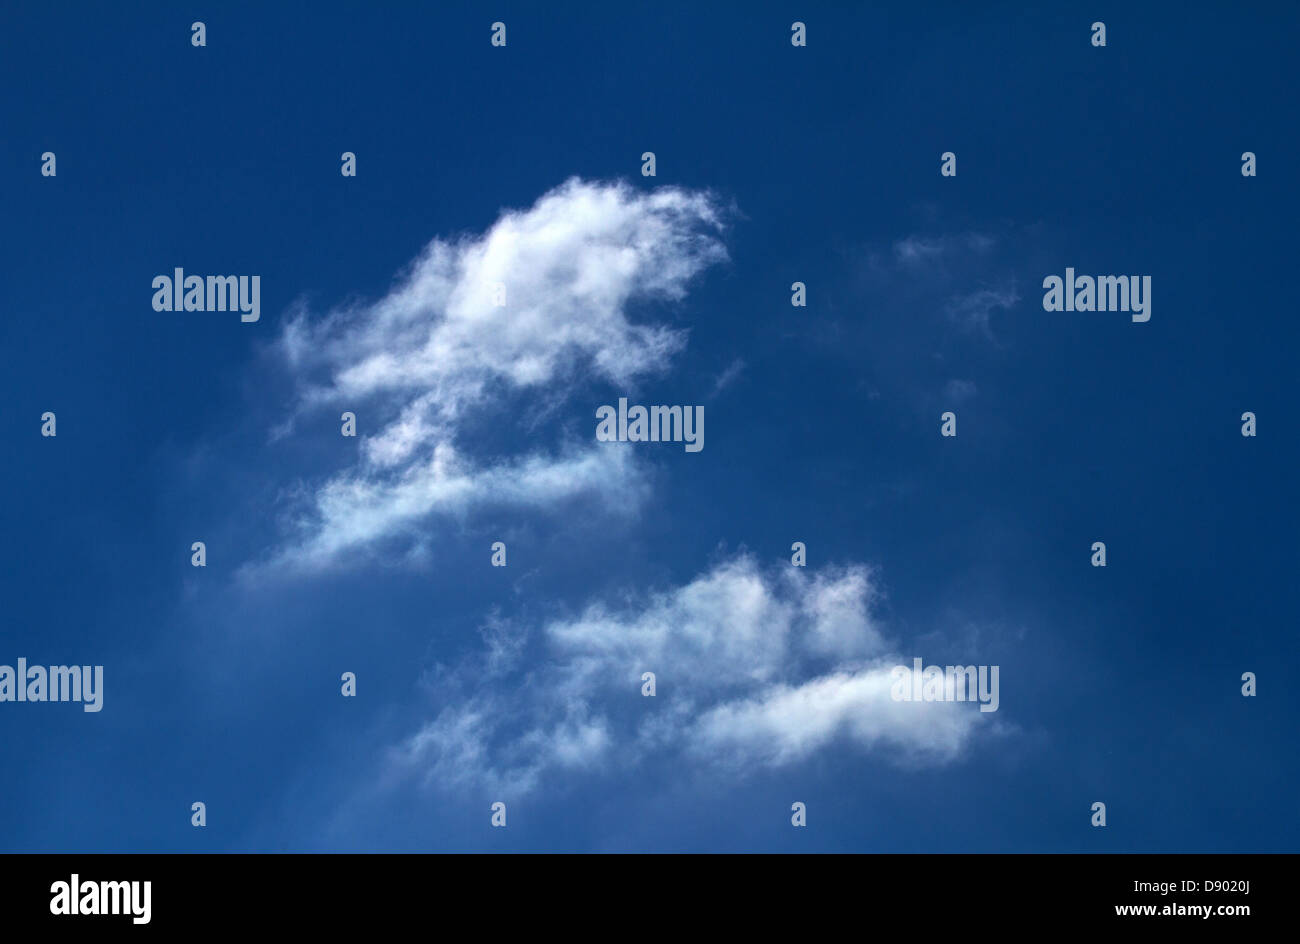 Fluffy white clouds in a blue sky Banque D'Images